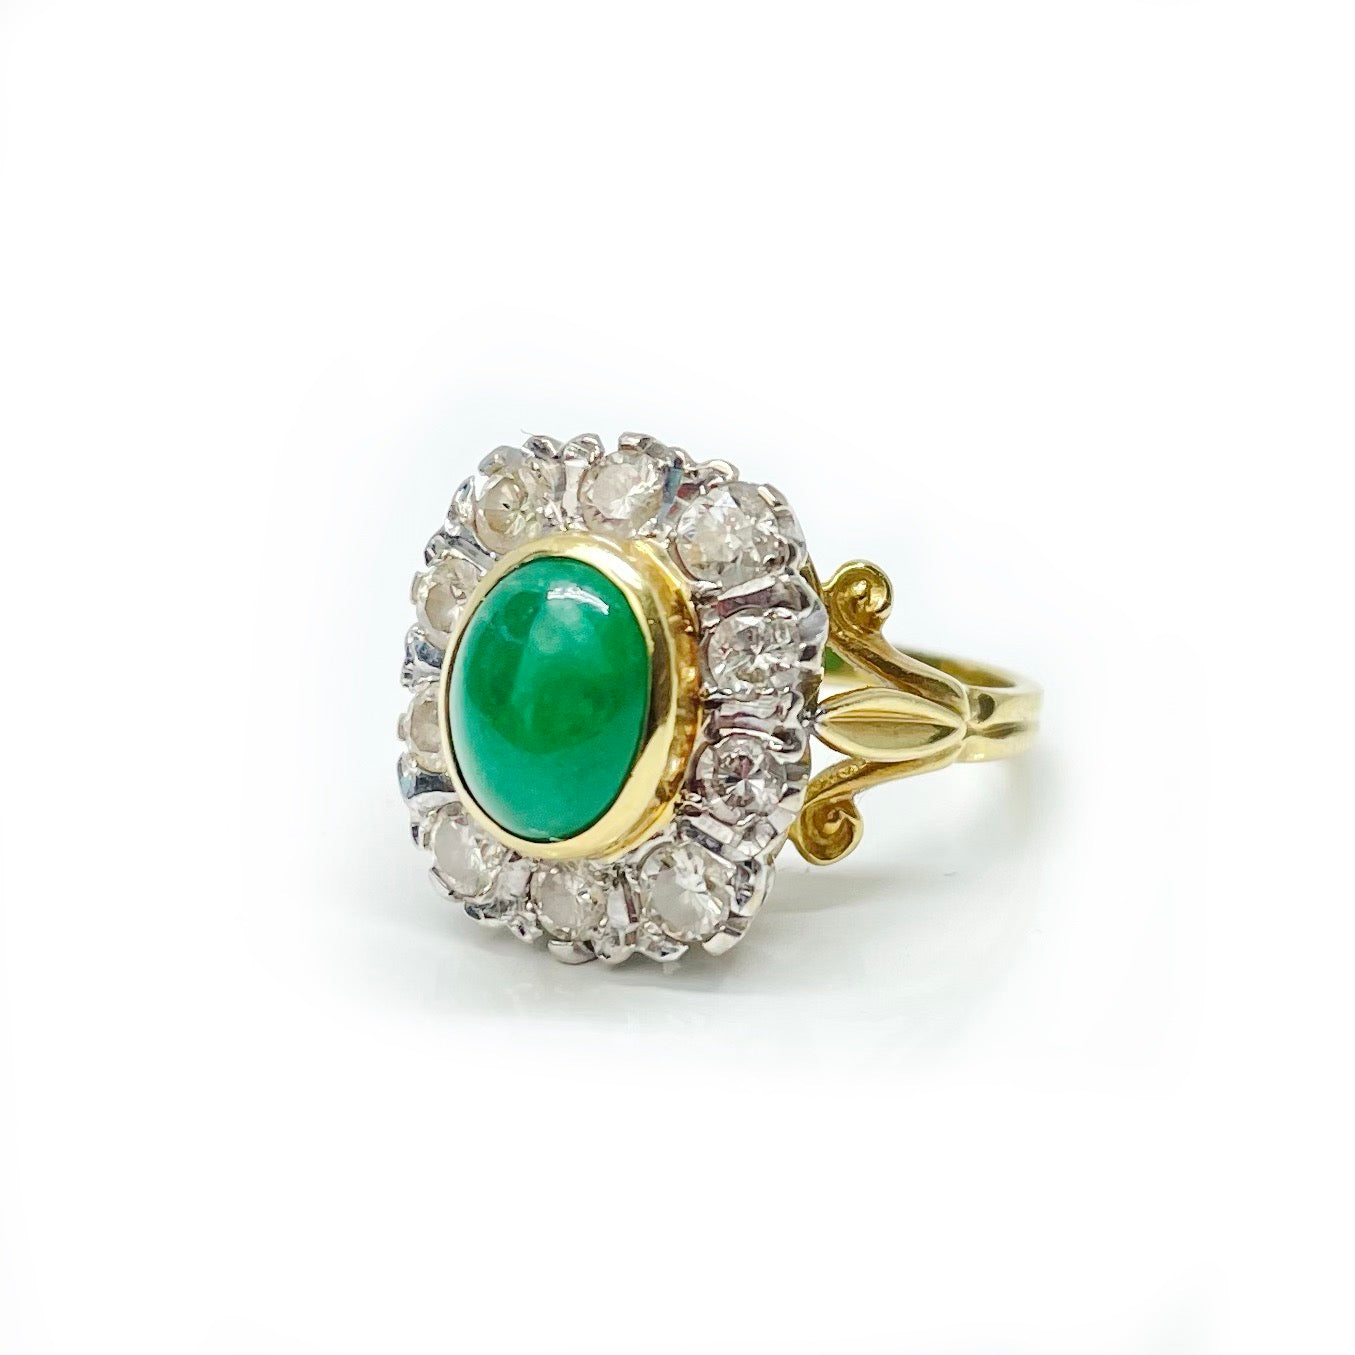 Vintage Emerald and Diamond Ring in 18k